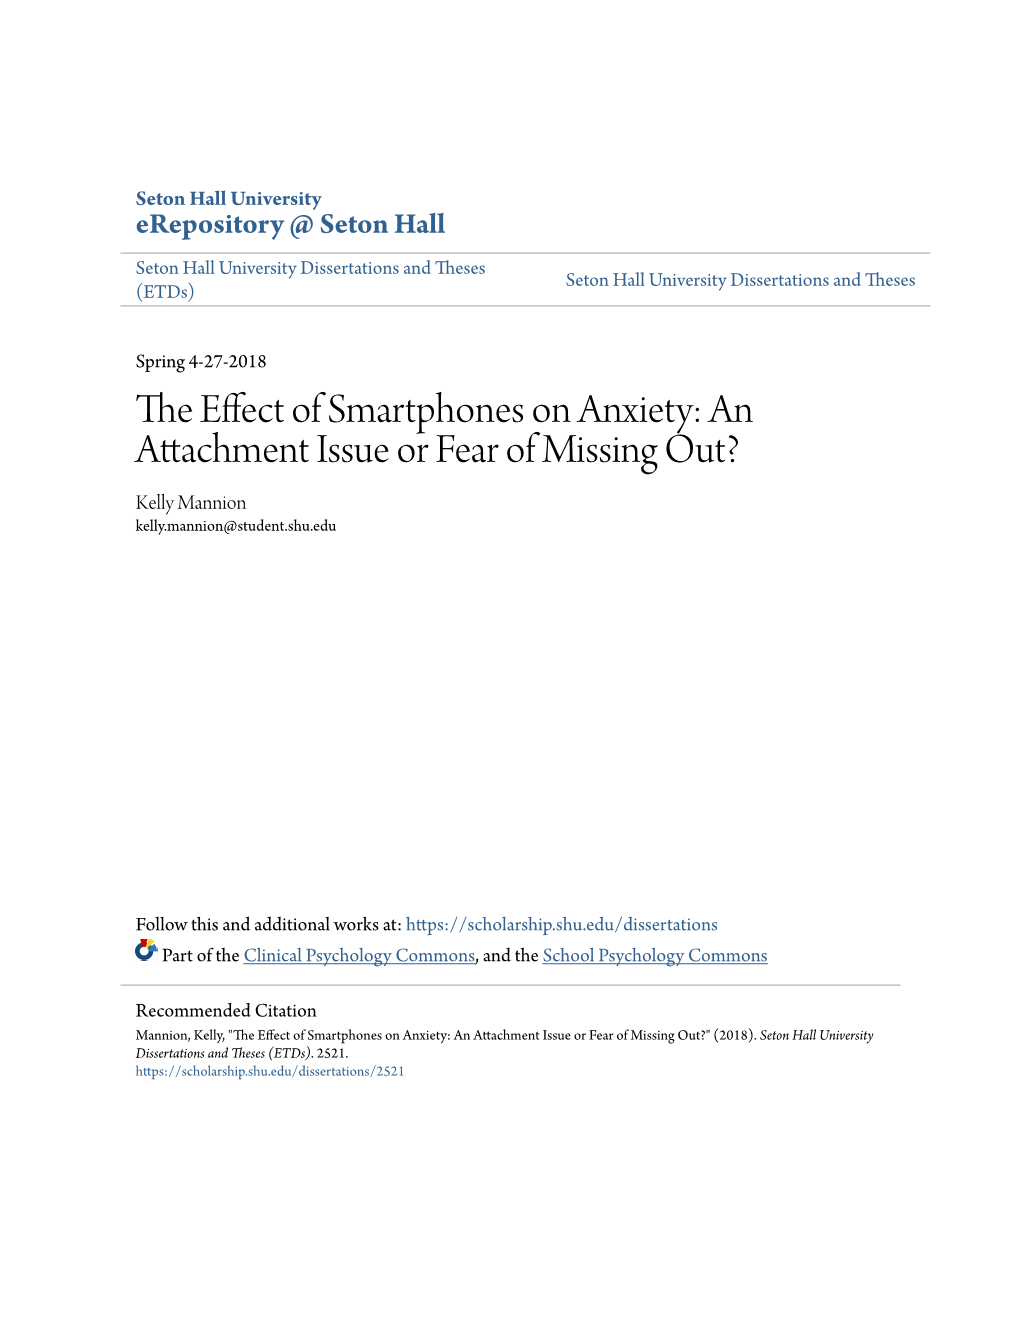 The Effect of Smartphones on Anxiety: an Attachment Issue Or Fear of Missing Out?" (2018)